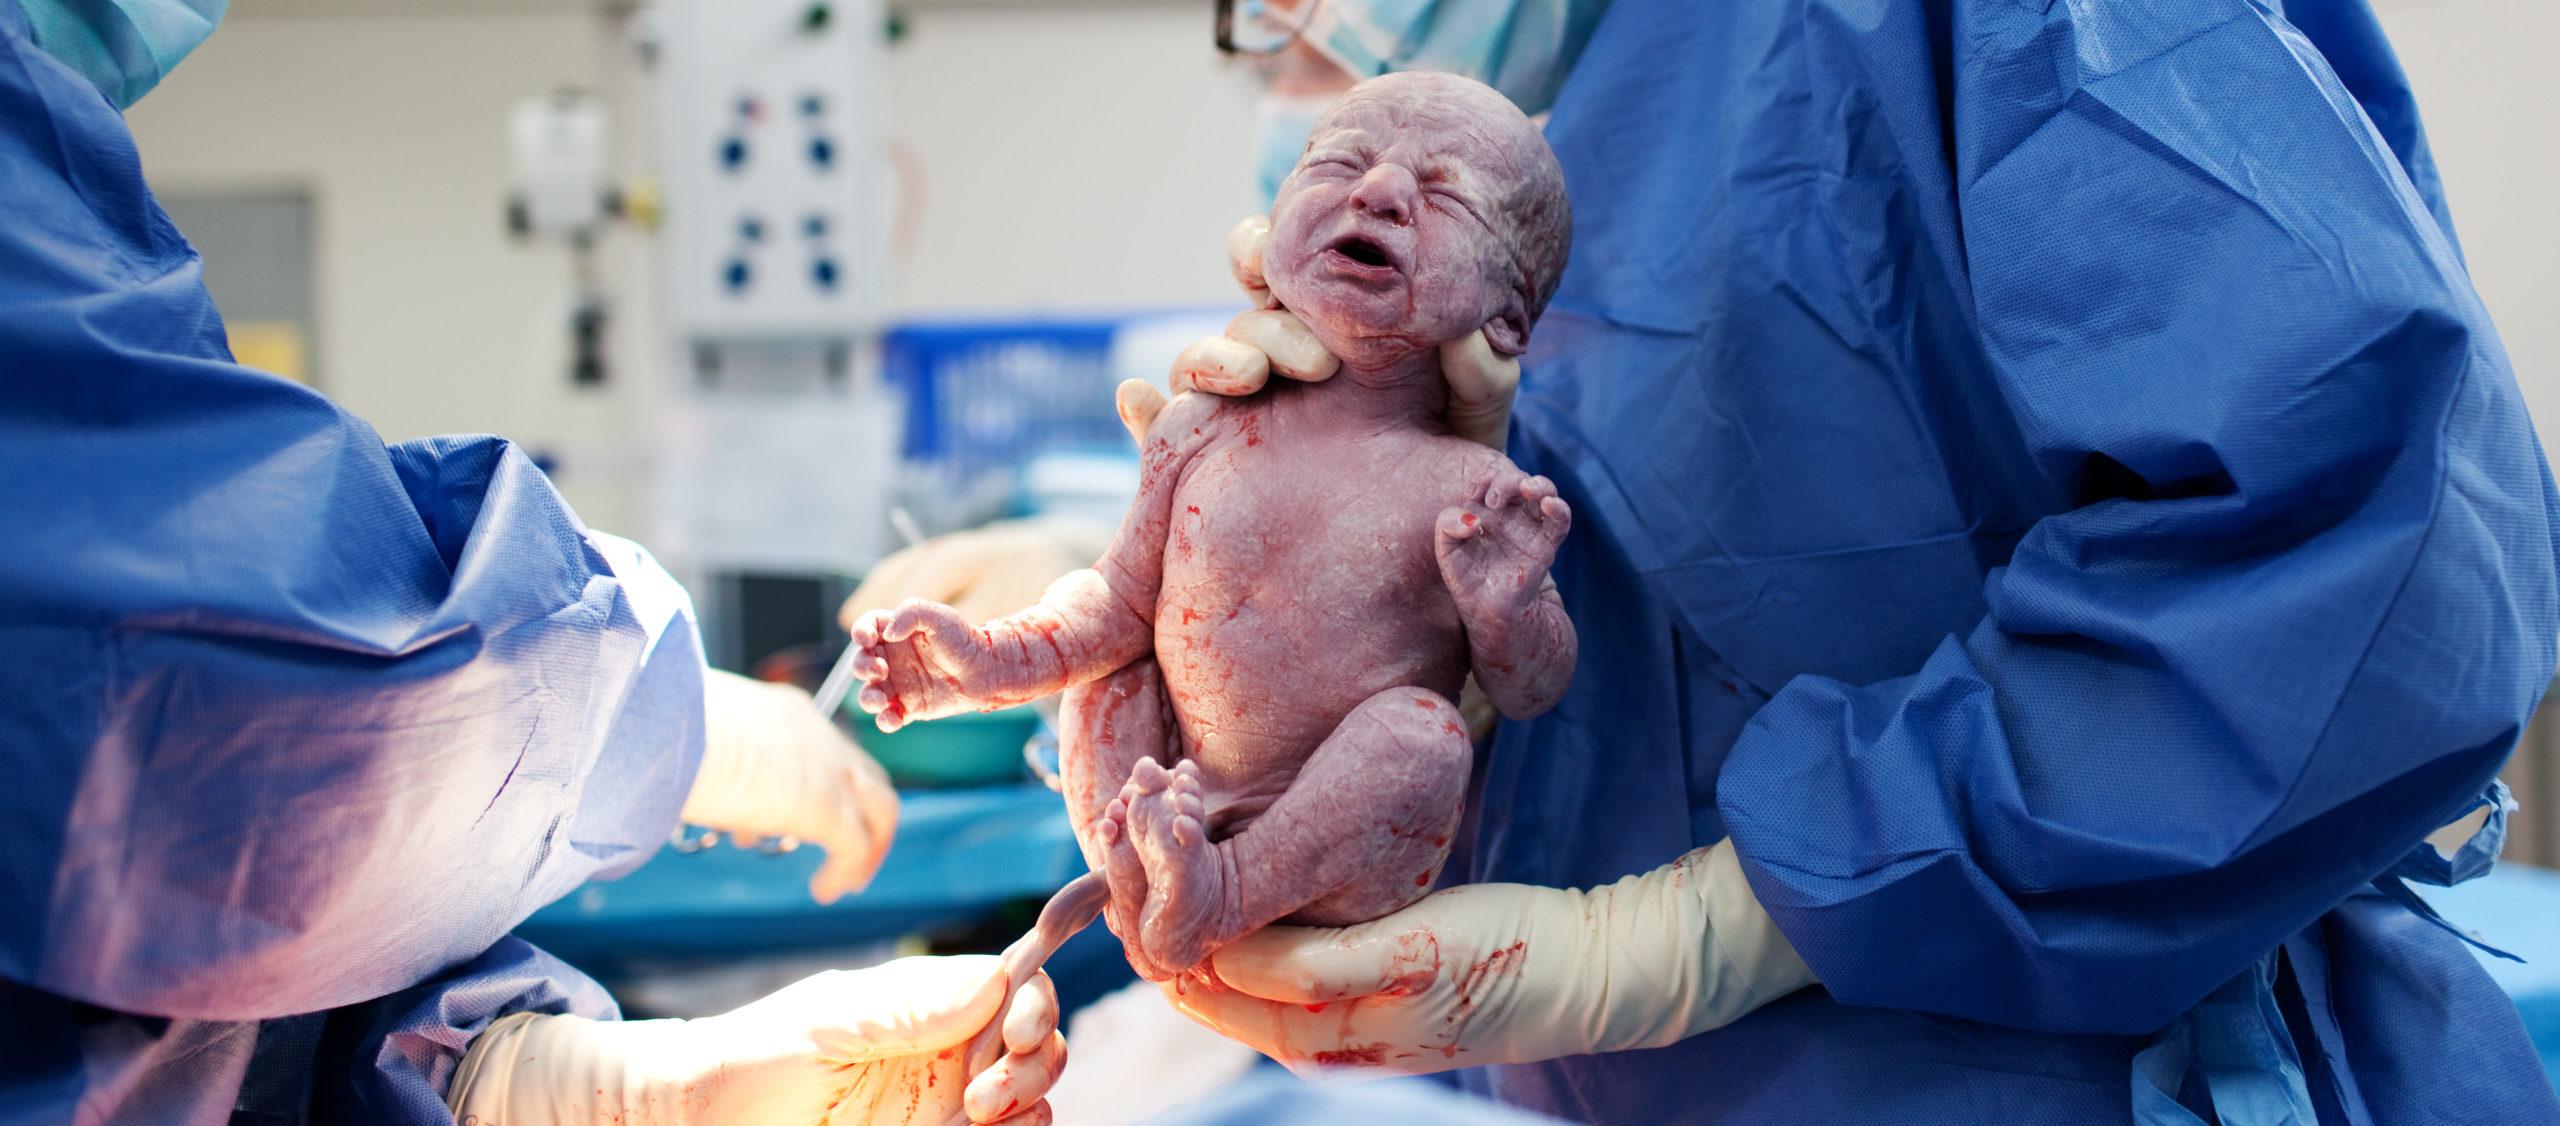 Baby being born via C-Section